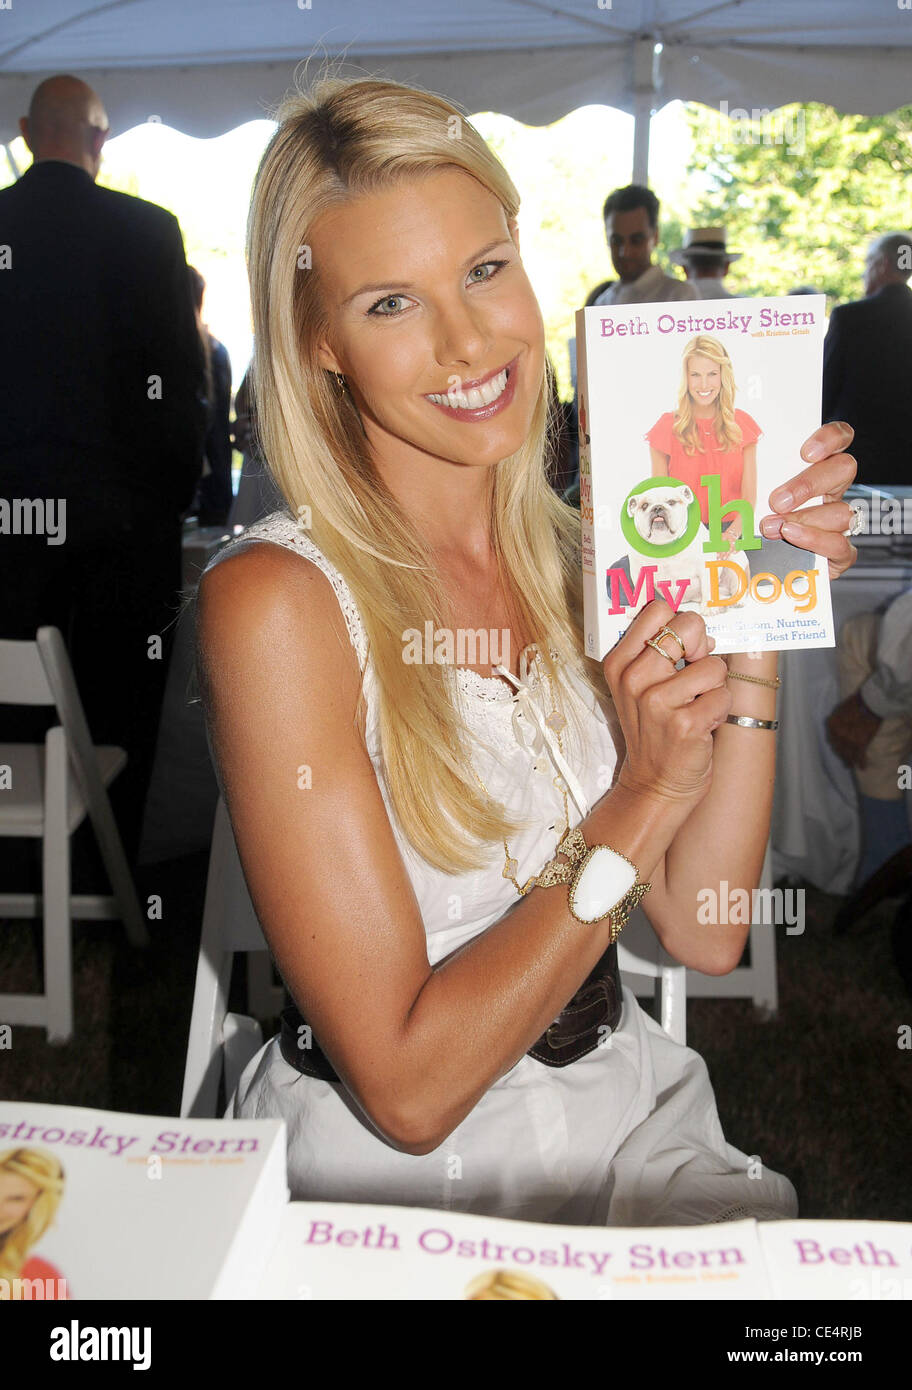 Author Beth Ostrosky Stern  attends the '2010 Authors Night', at The East Hampton Library  East Hampton, New York - 13.08.10 Stock Photo